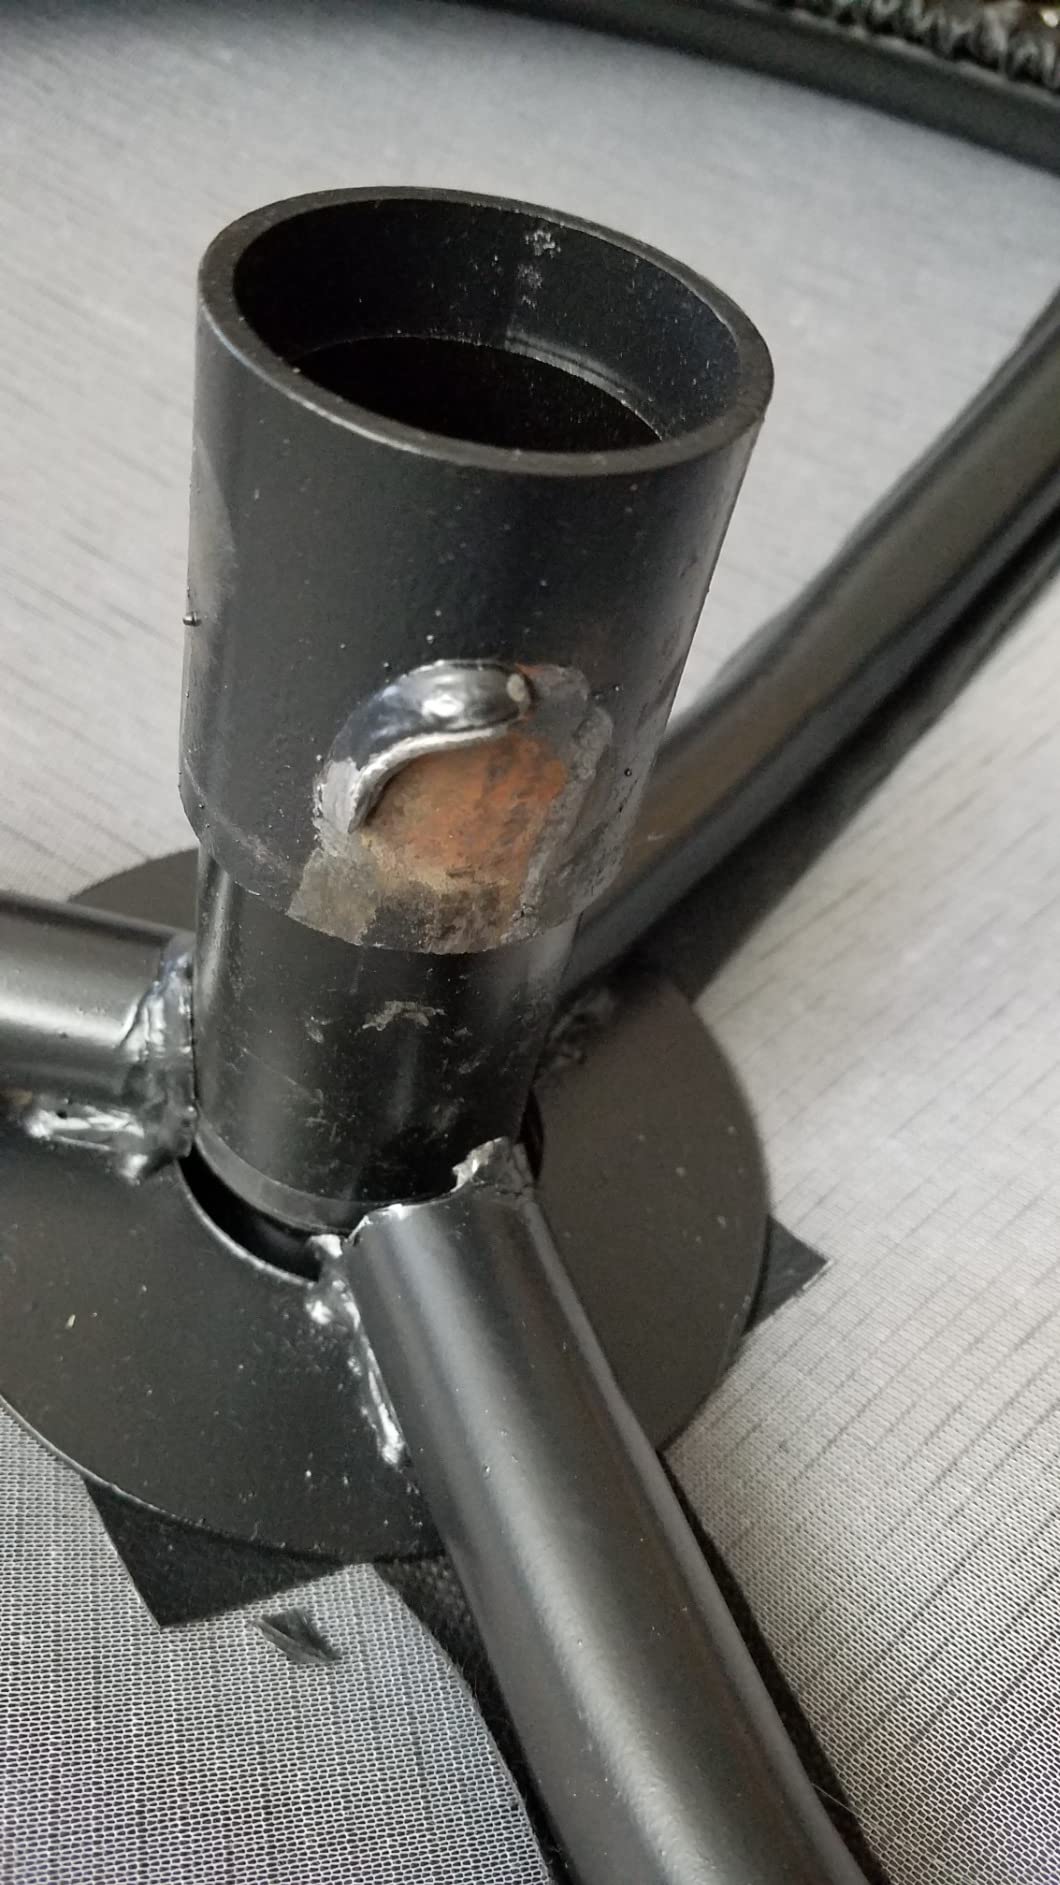 WARNING possible SAFETY ISSUE - Update